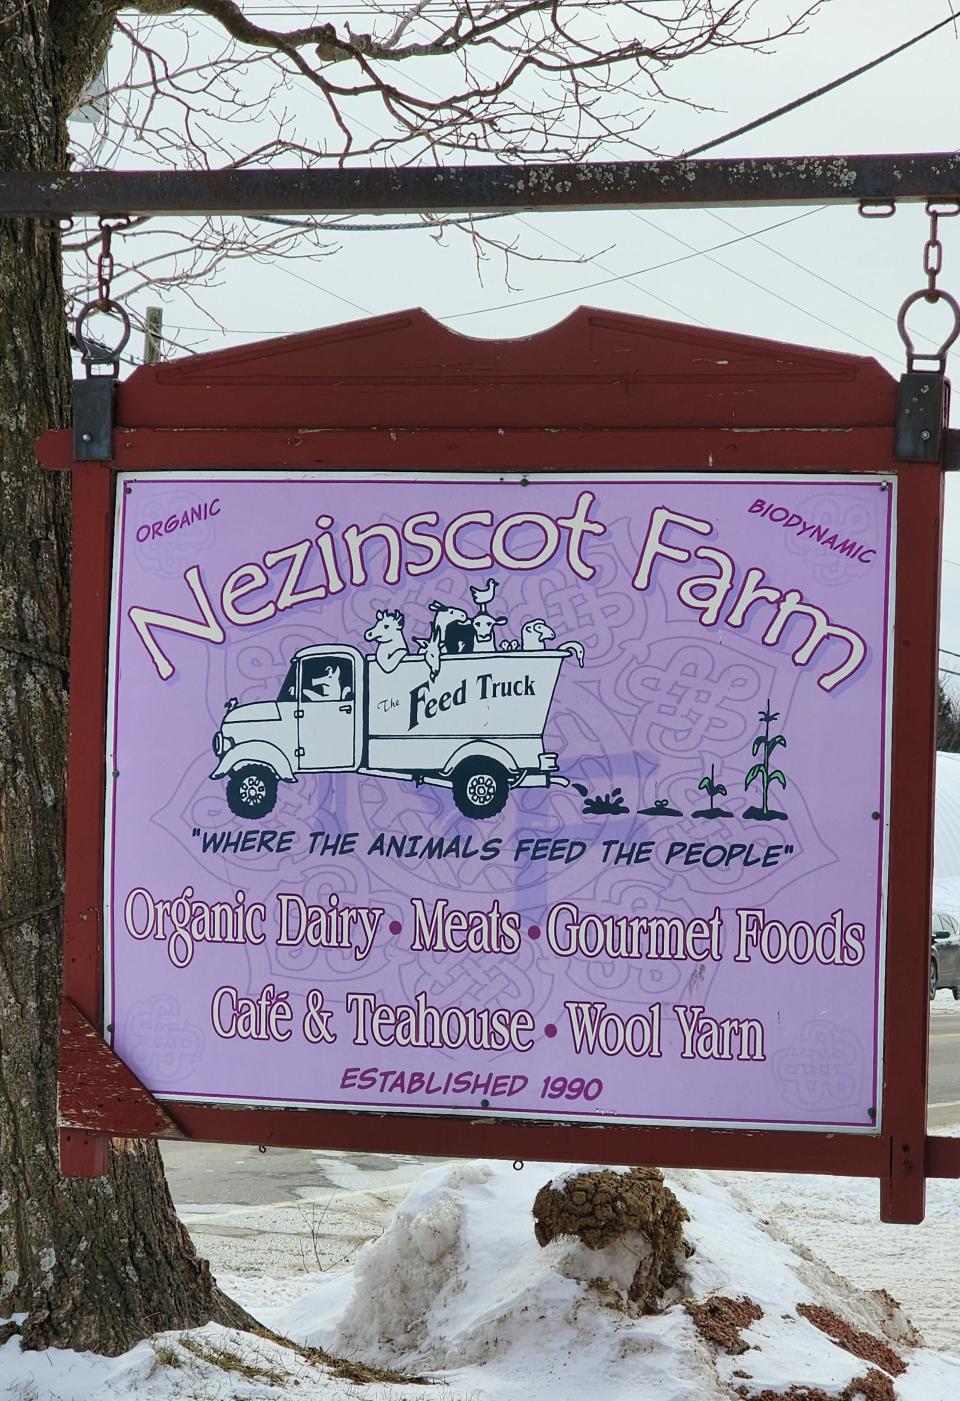 Nezinscot Farm is in Turner,  a town in Androscoggin County, Maine, and part of the Lewiston-Auburn metropolitan area.